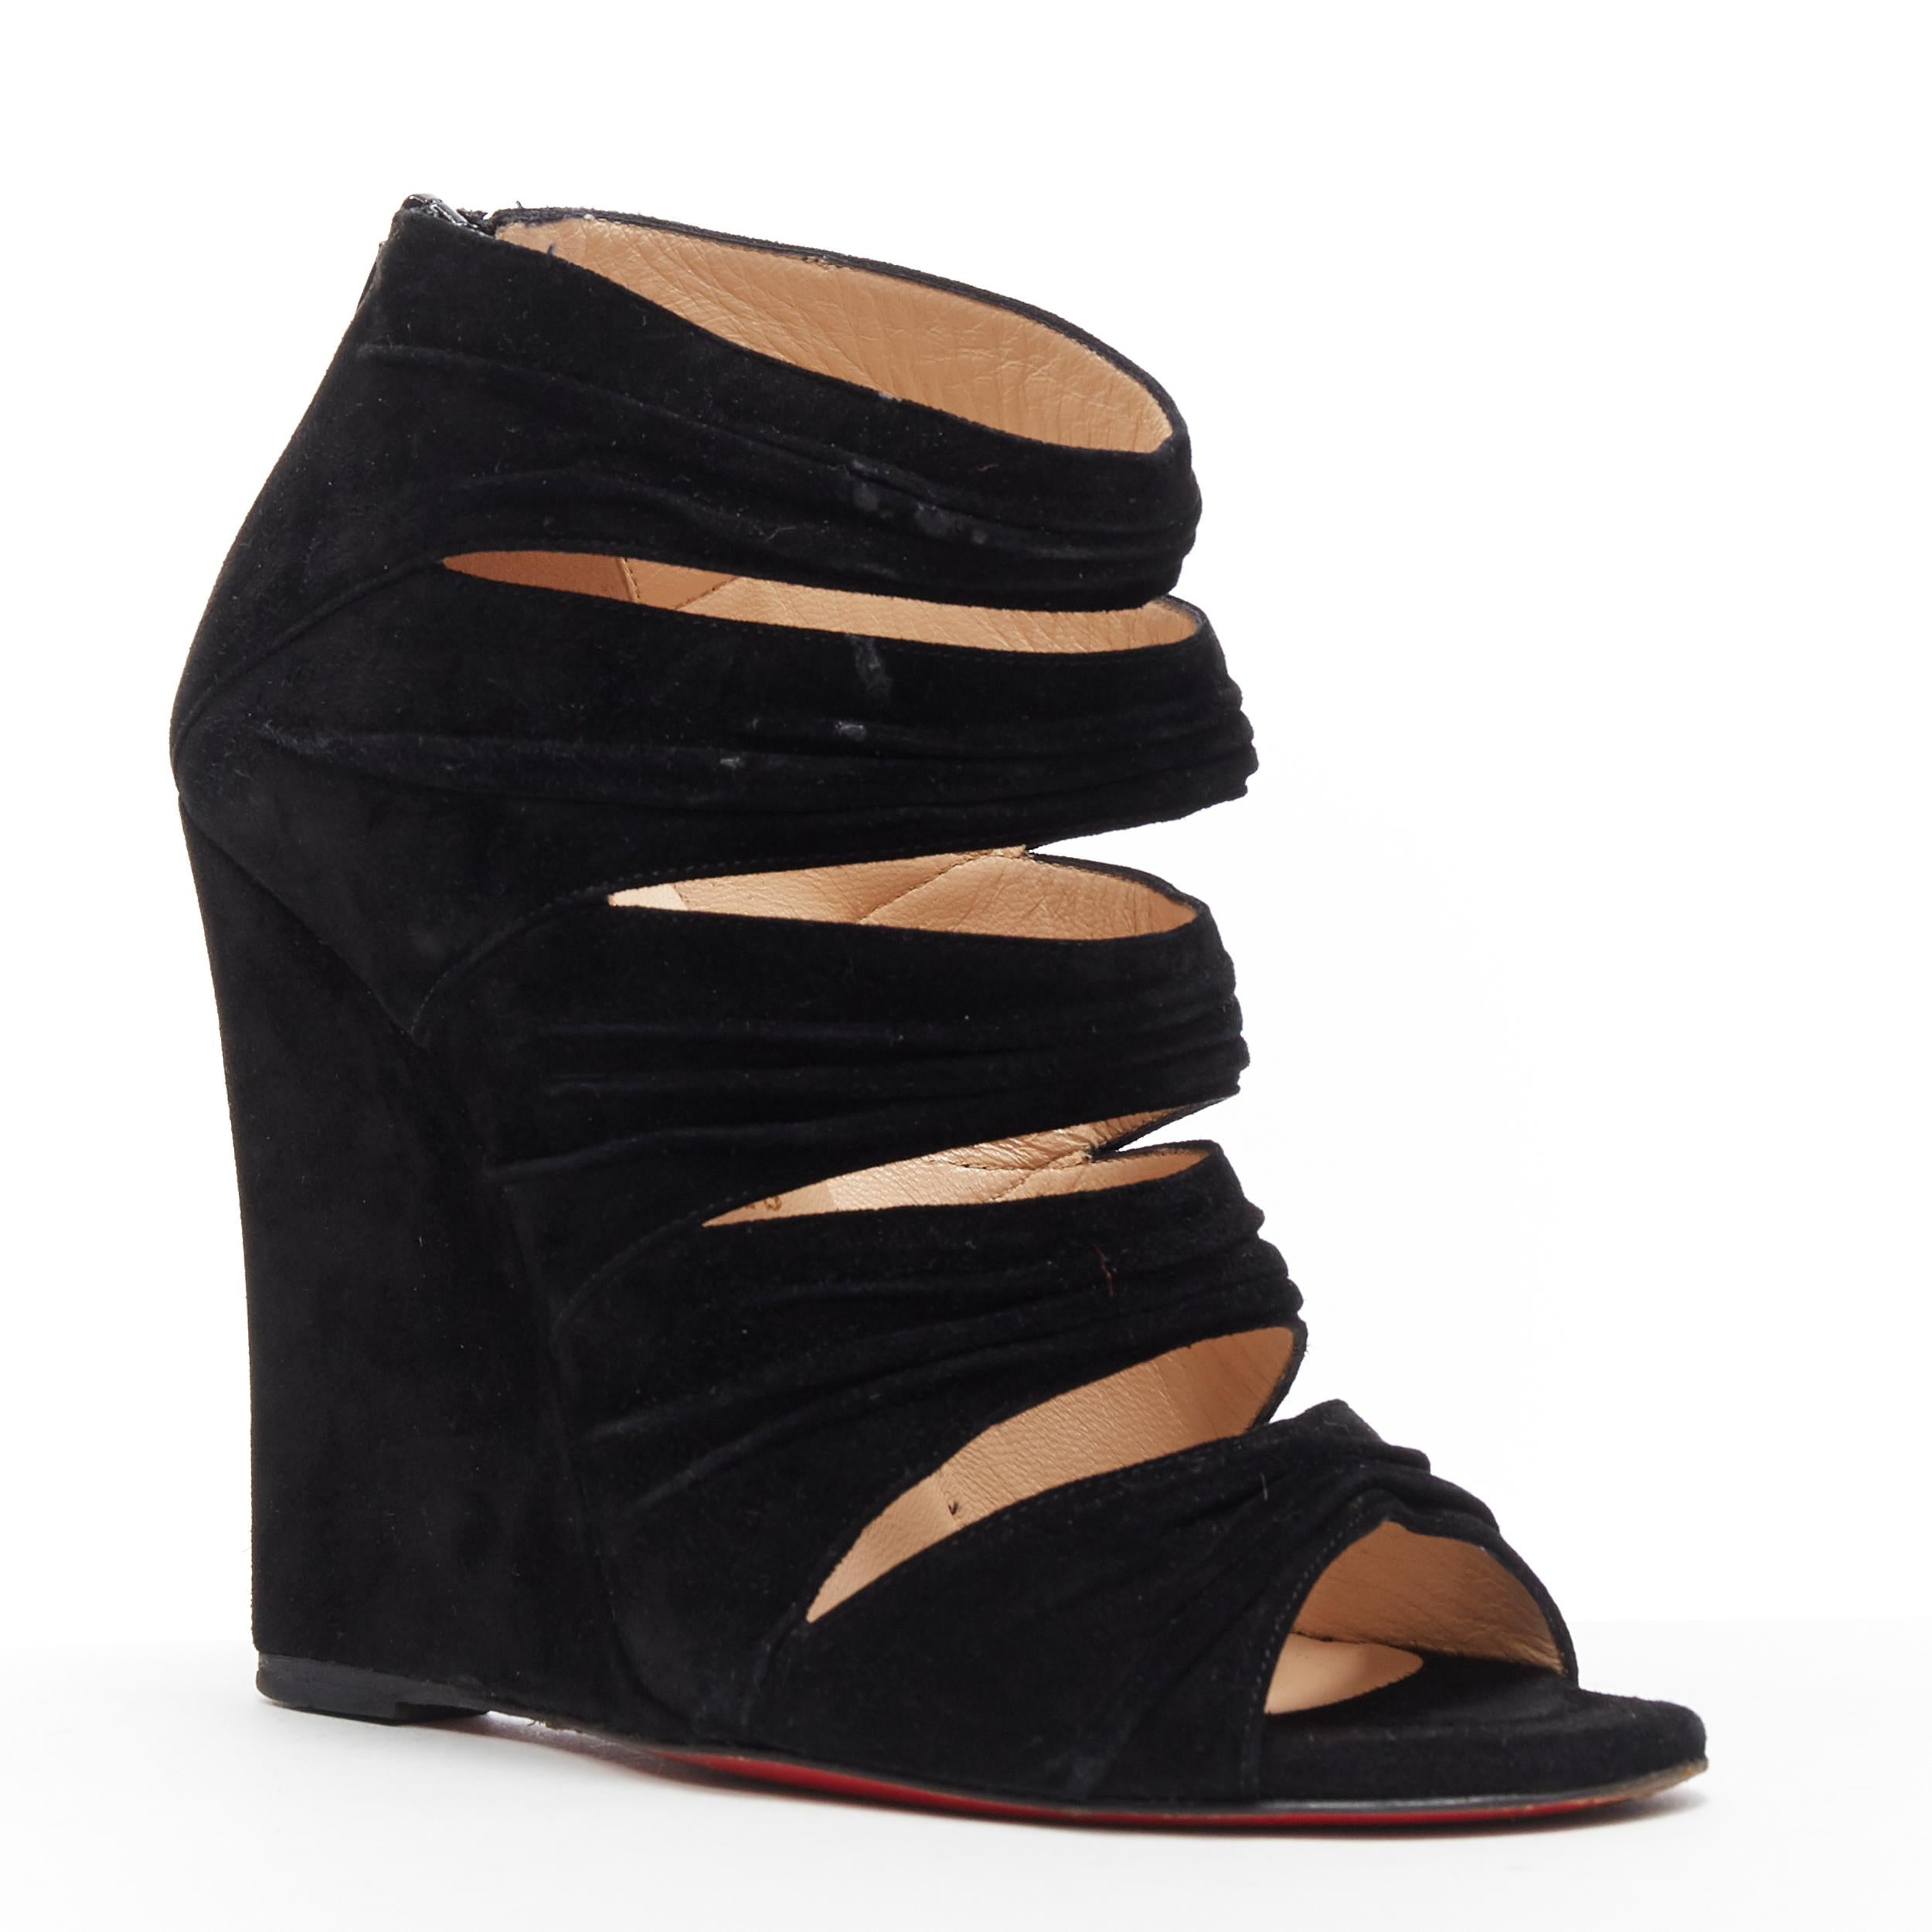 CHRISTIAN LOUBOUTIN black suede rusched strappy open toe wedge bootie heel EU37
Brand: Christian Louboutin
Designer: Christian Louboutin
Model Name / Style: Wedge
Material: Suede
Color: Black
Pattern: Solid
Closure: Zip
Extra Detail: High (3-3.9 in)